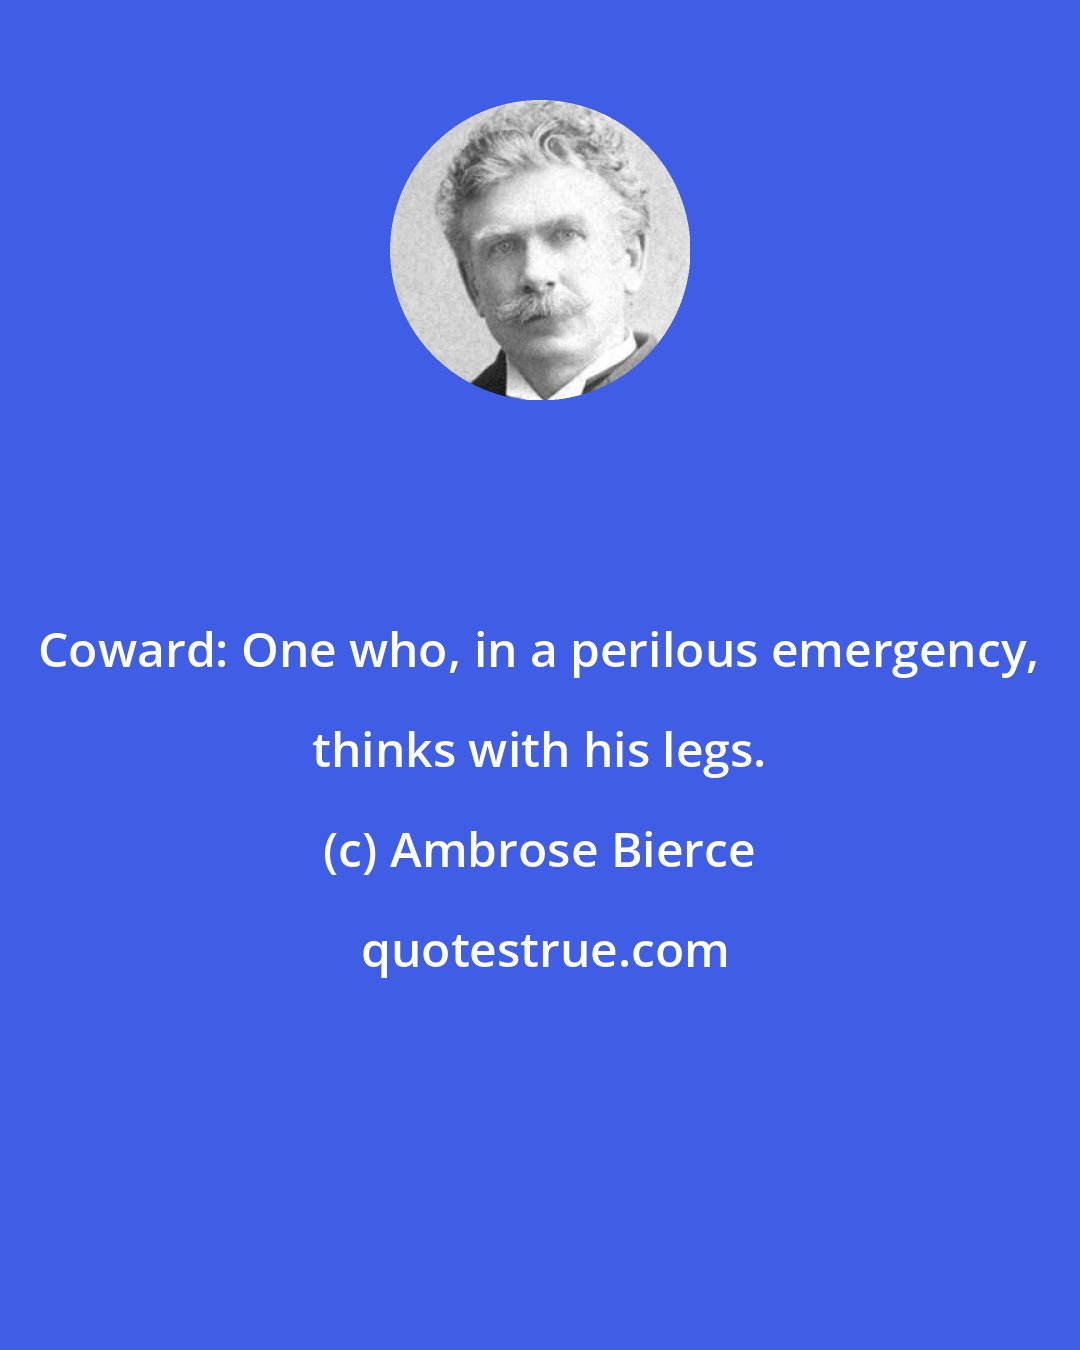 Ambrose Bierce: Coward: One who, in a perilous emergency, thinks with his legs.